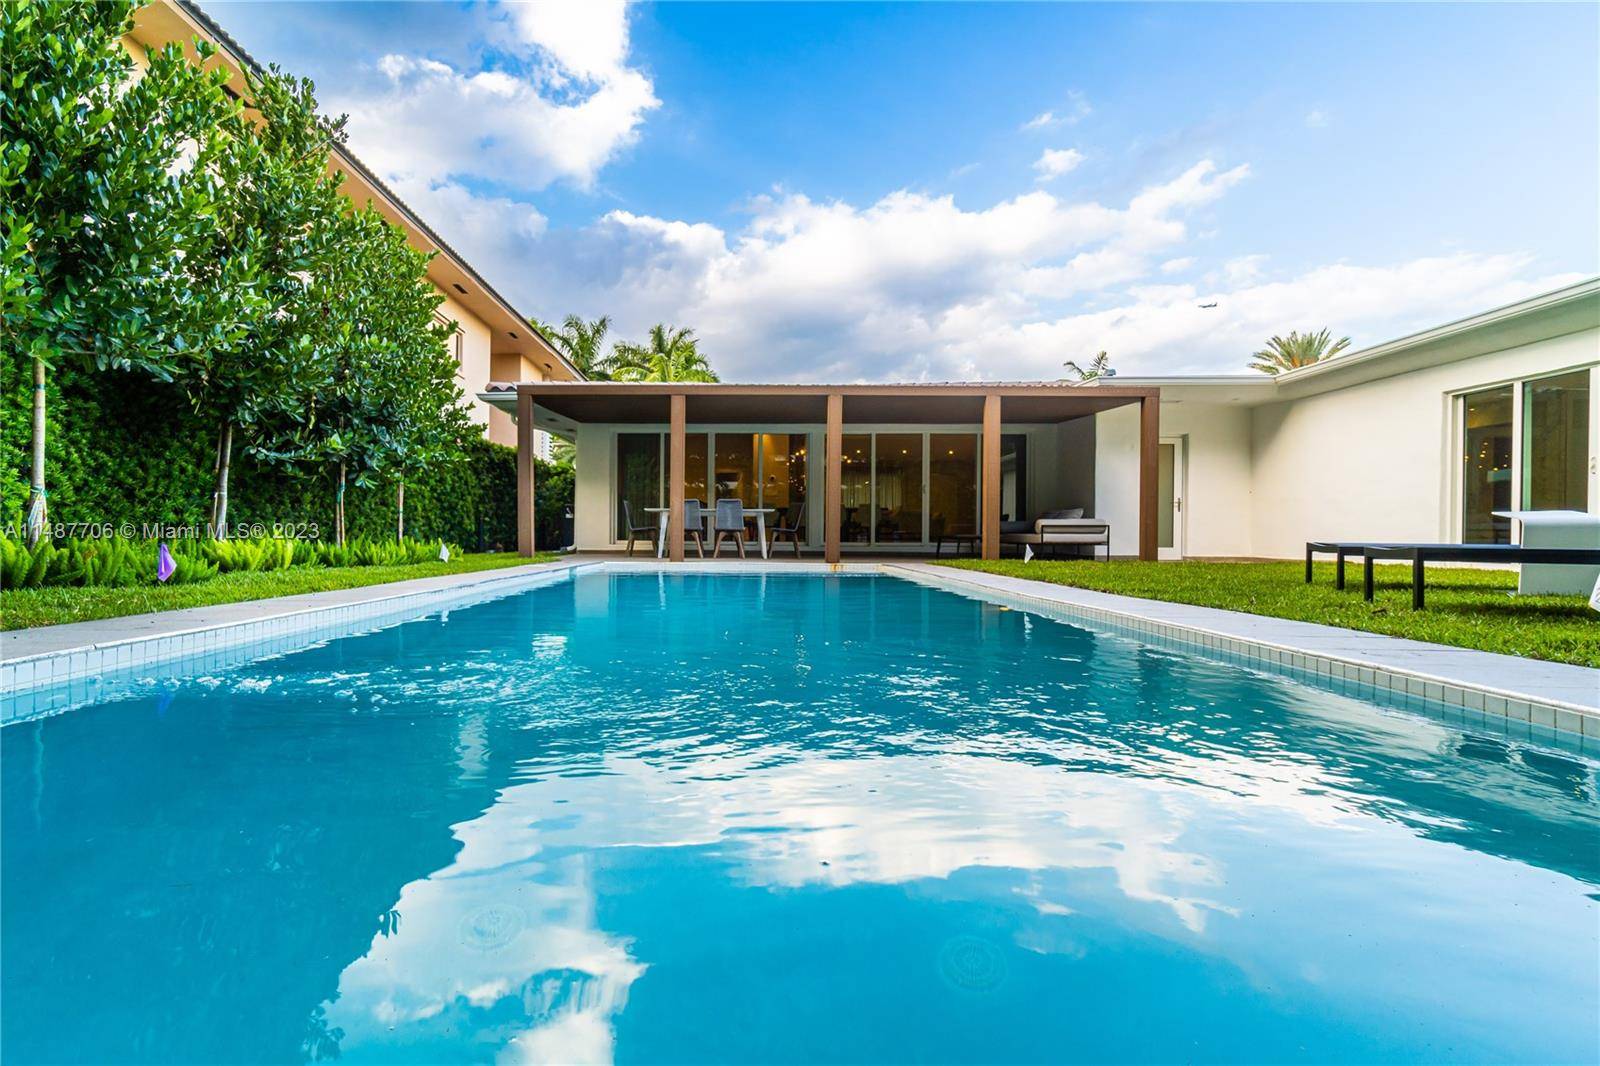 Located in the sought after Venetian Islands of Miami Beach, this stunning single family home has undergone a beautiful renovation and now features modern updates along with a private pool.